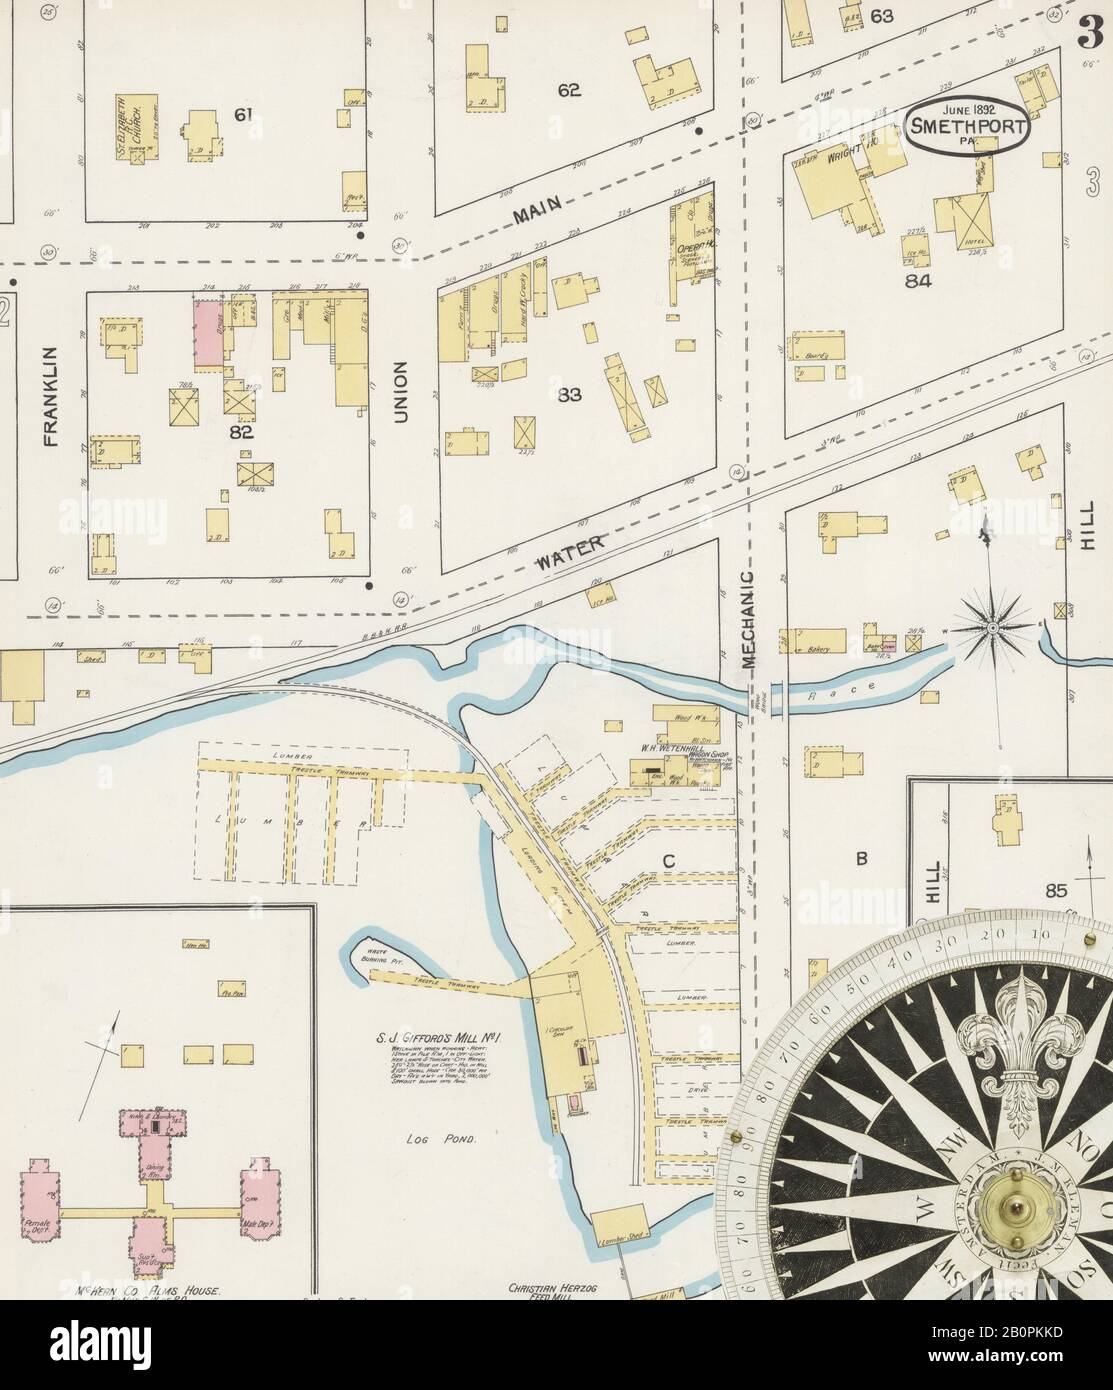 Image 3 of Sanborn Fire Insurance Map from Smethport, McKean County, Pennsylvania. Jun 1892. 3 Sheet(s). Includes East Smethport, America, street map with a Nineteenth Century compass Stock Photo